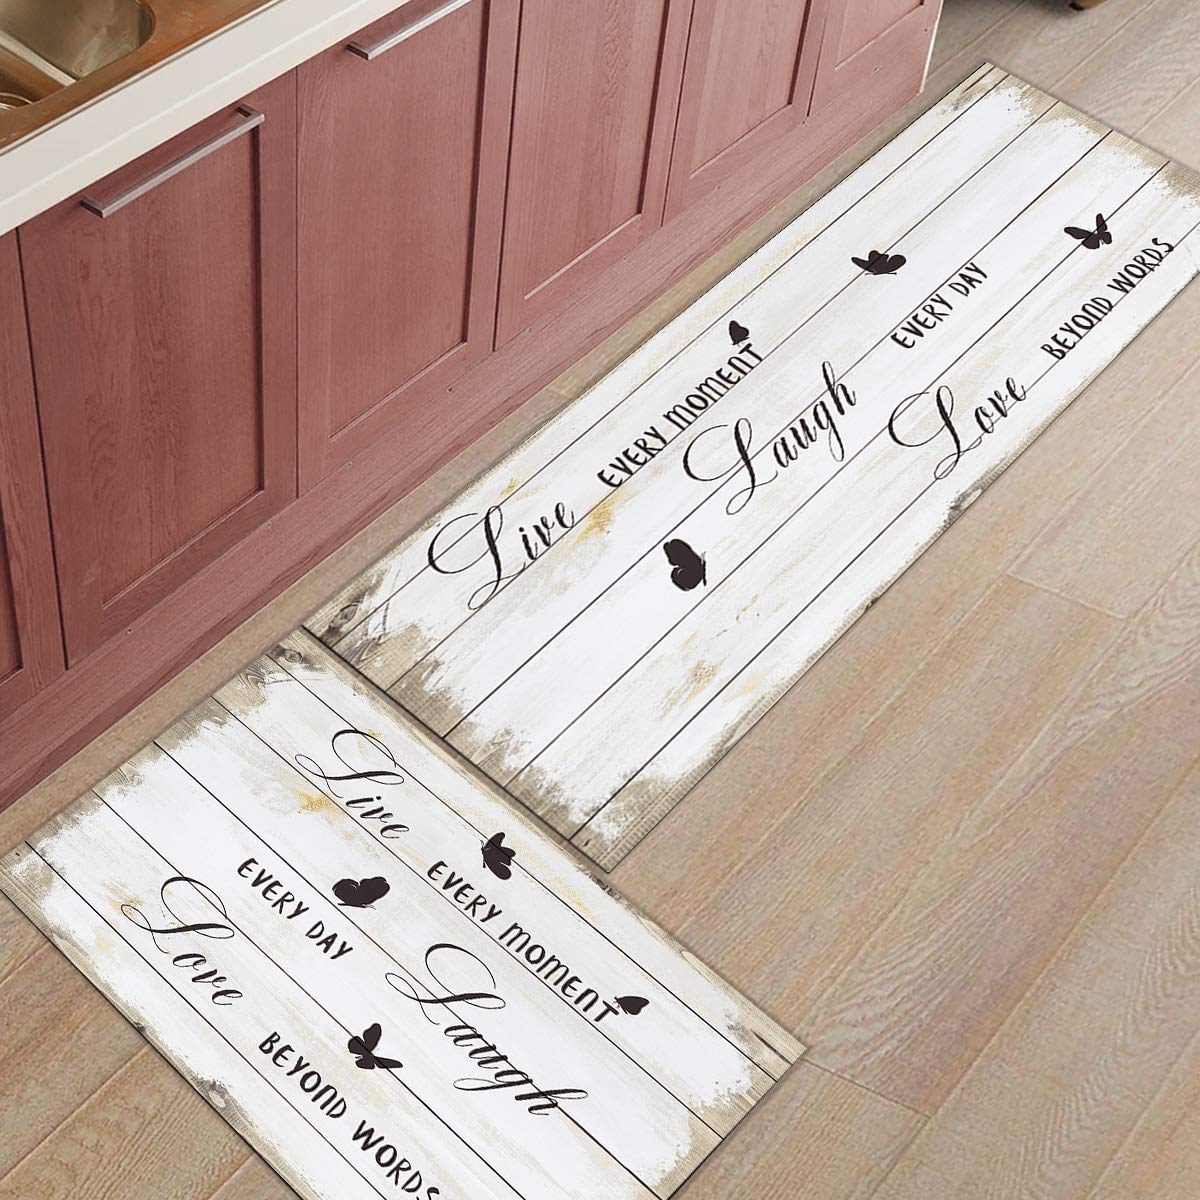 Kitchen Mat Set 2 Piece Kitchen Rugs, Black Positive Energy Live - Laugh - Love Butterflies Soft Rubber Backing Mats Bathroom Runner Area Rugs, 19.7x31.5in + 19.7x47.2in Vintage Wooden Stripes Grain